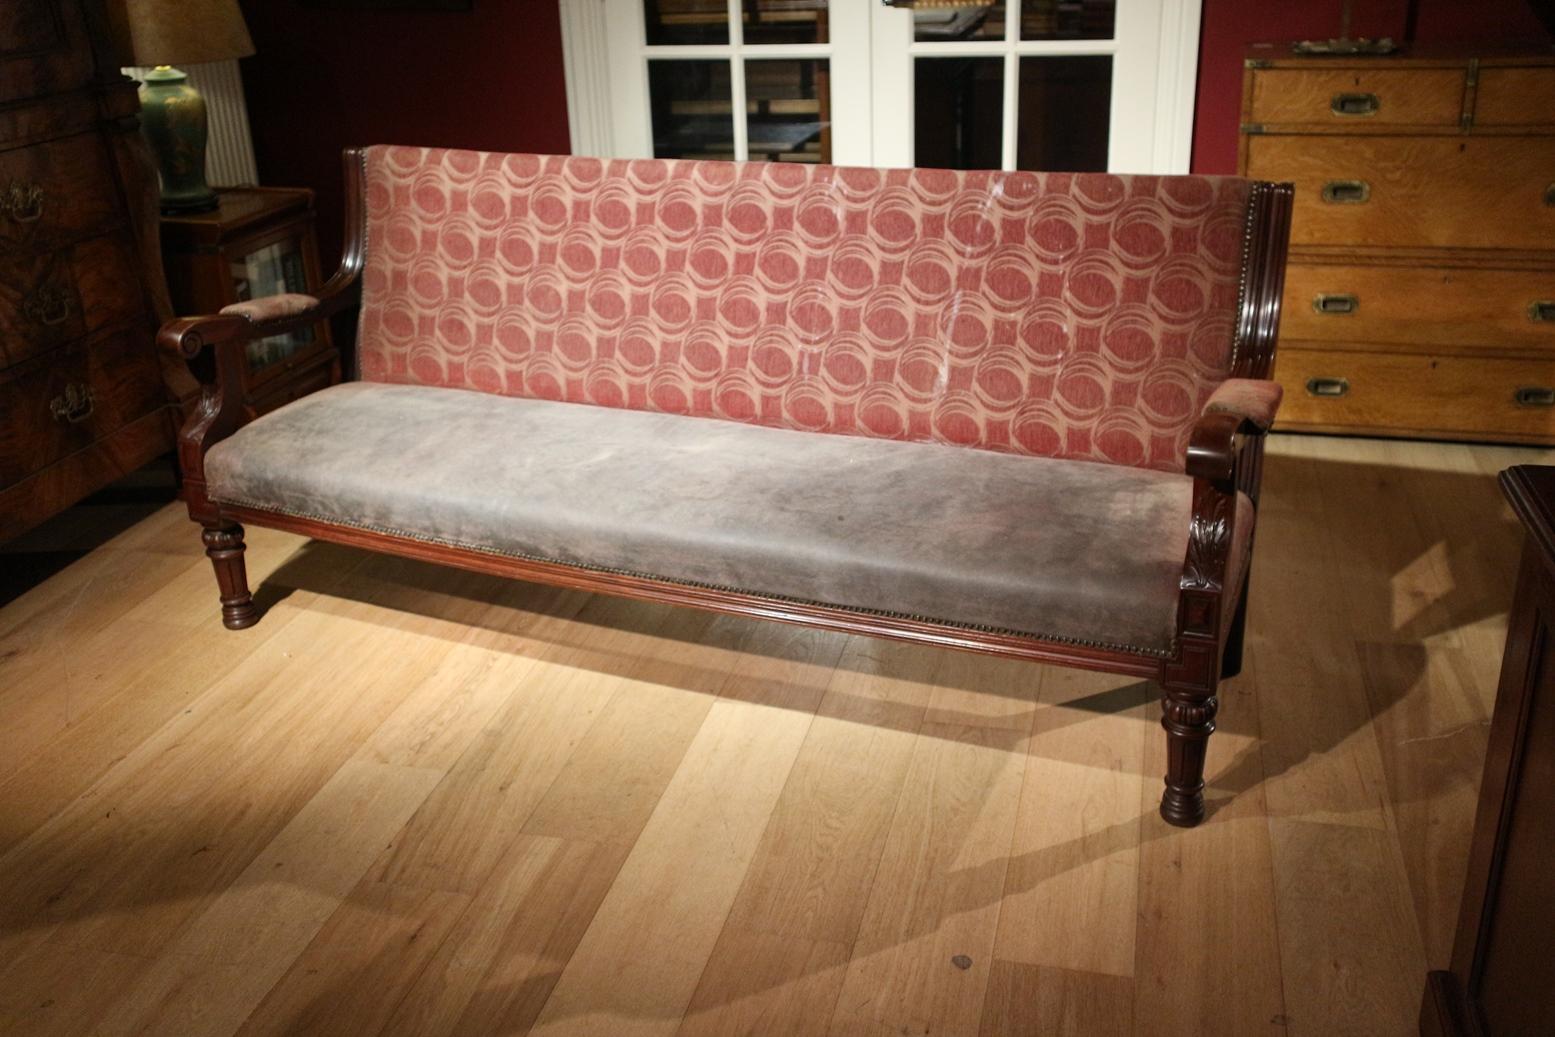 Beautiful antique mahogany sofa from the Victorian era. Very solid bench in solid mahogany. The sofa is in perfect condition except for upholstery. Top quality! Can be used for many purposes. Waiting room, large hall, living room, etc. Can also be